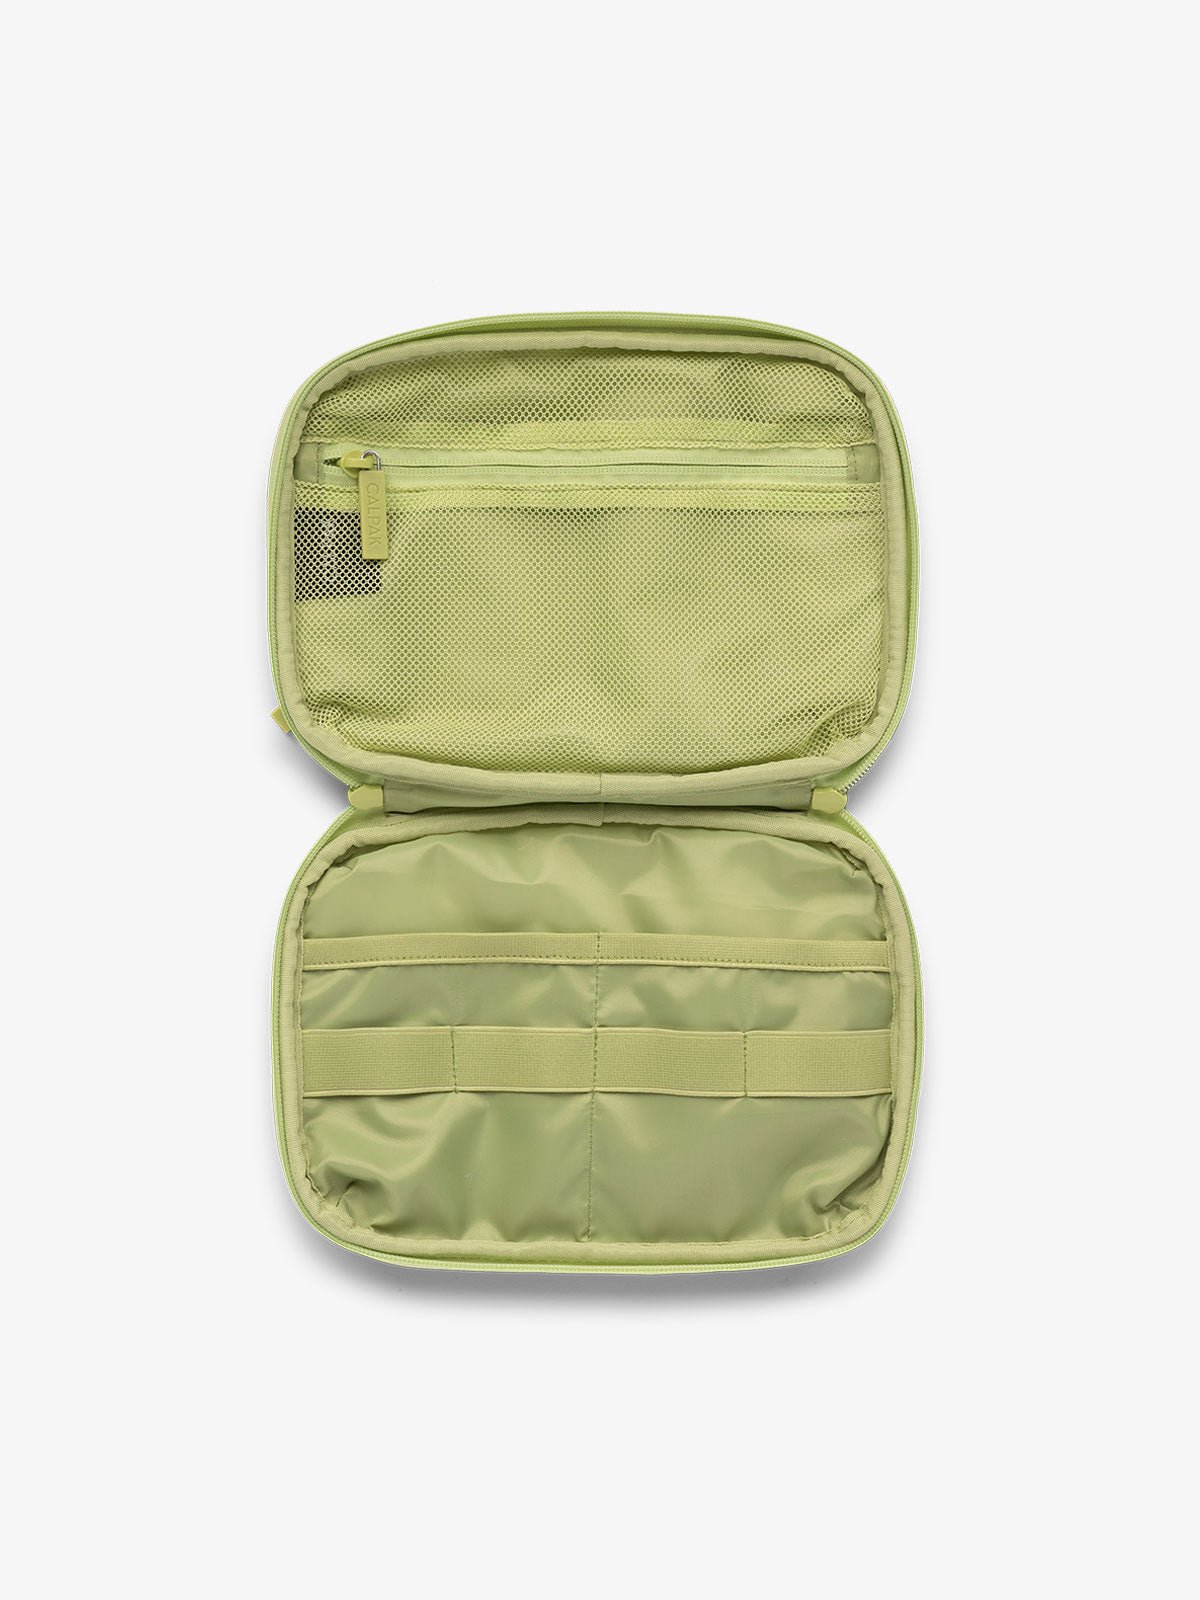 Interior view of tablet organizer in abstract green lime viper with loops and zippered pockets for organizing electronics and belongings